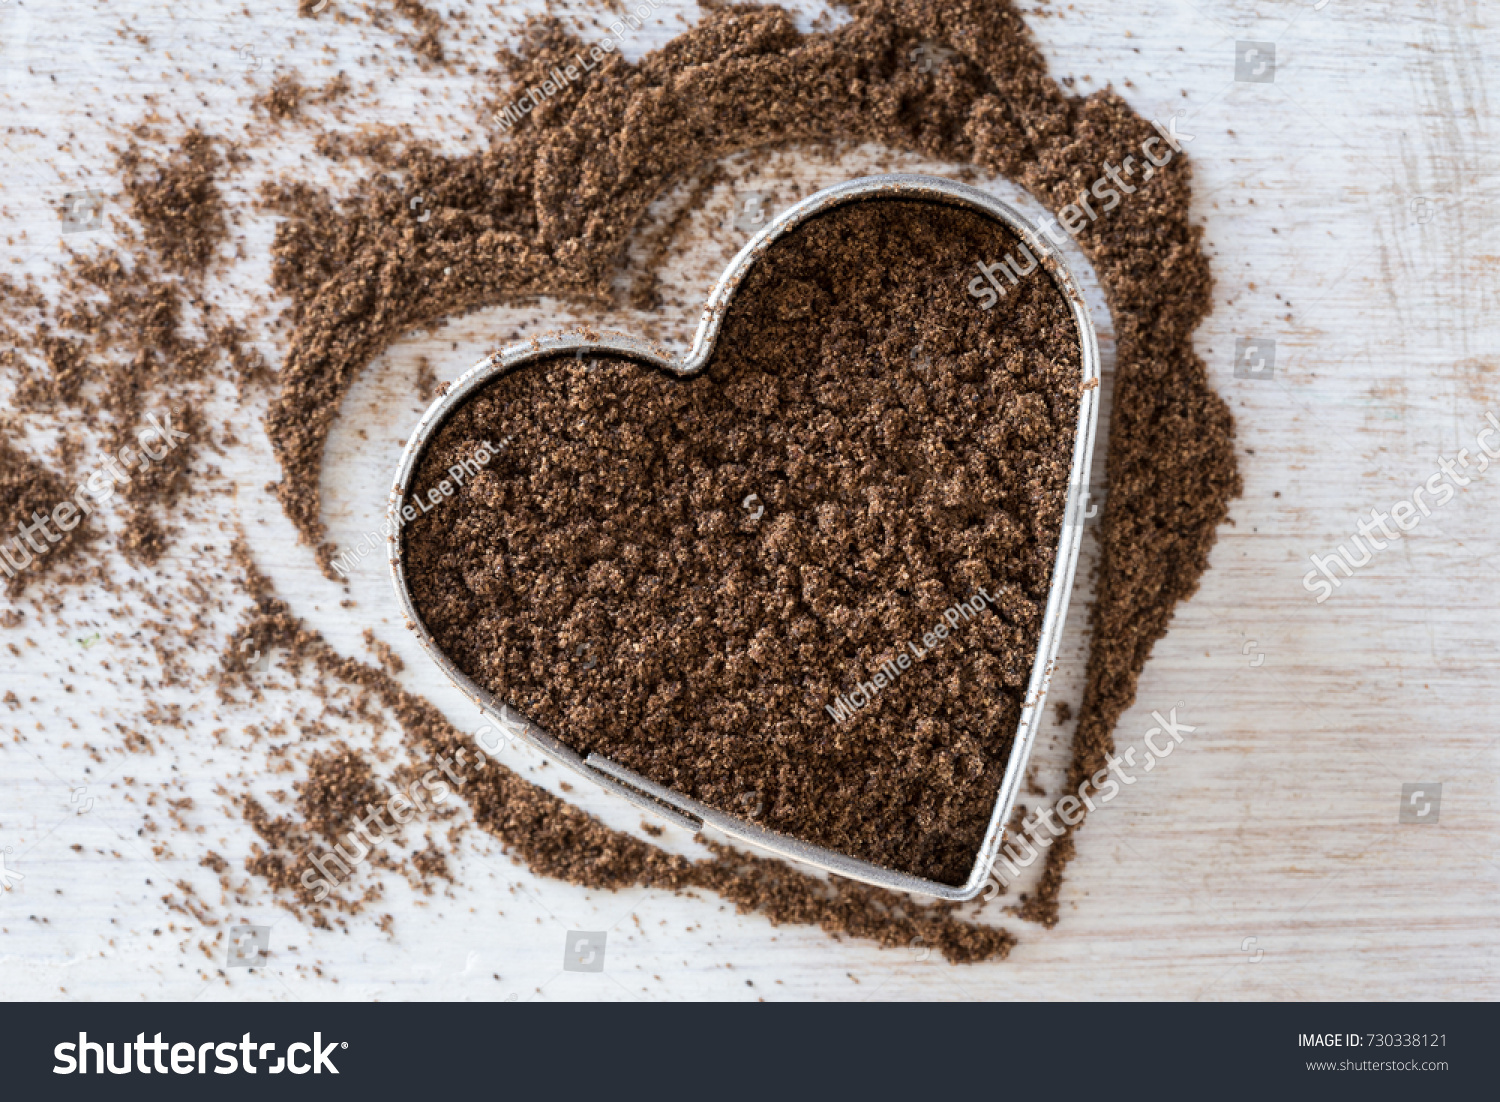 Ground Allspice in a Heart Shape #730338121